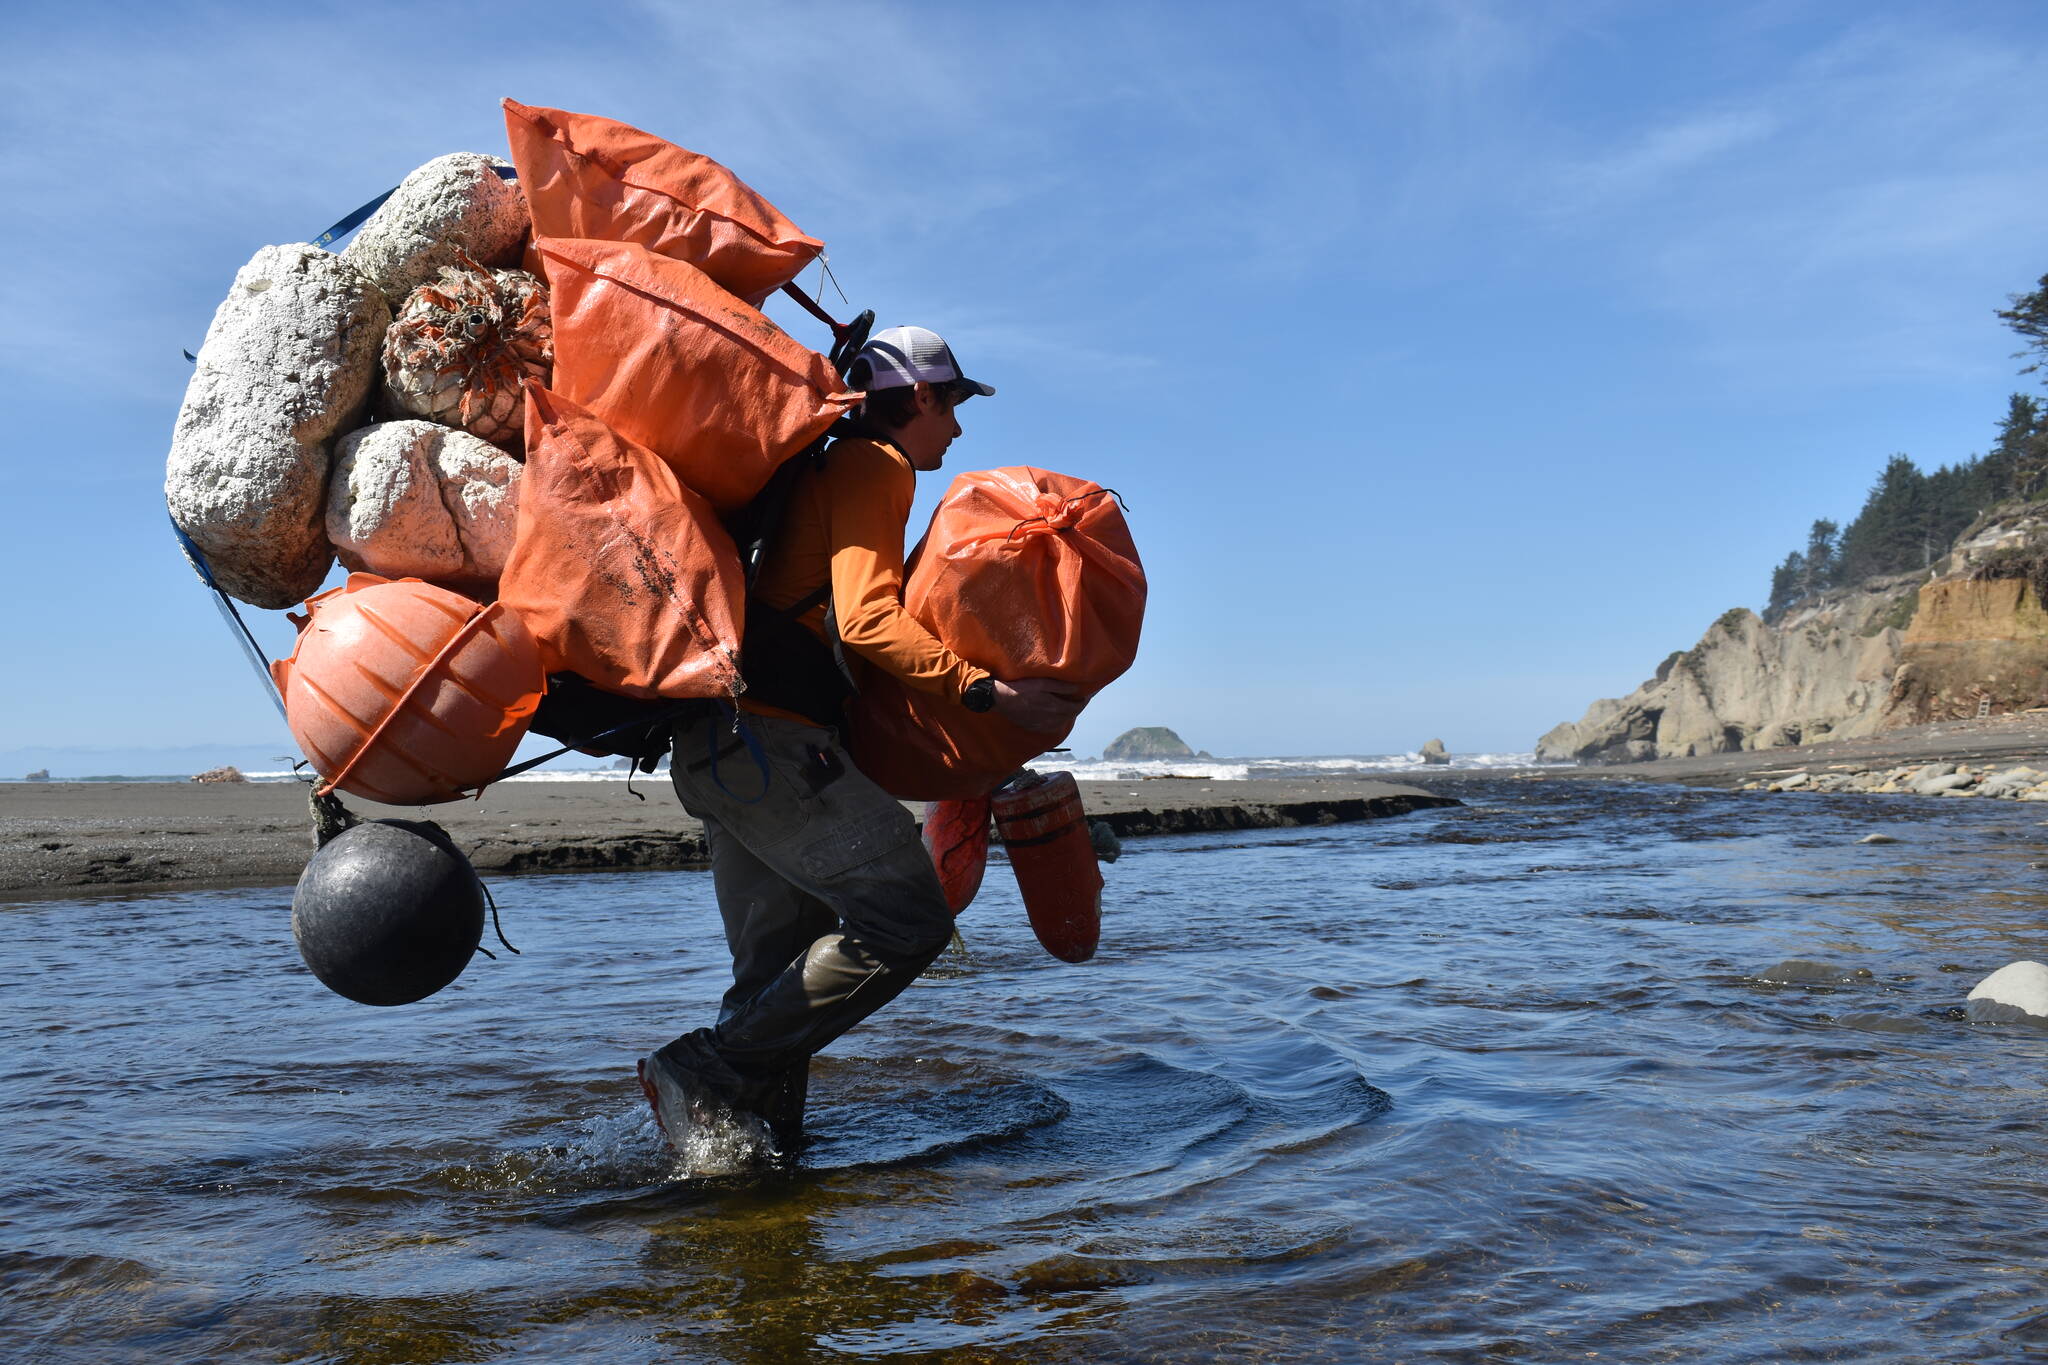 Kyle Deerkop, farm operations manager with Pacific Shellfish, crosses a creek hauling pounds of marine debris collected from a beach on the Quinault Indian Reservation. (Clayton Franke / The Daily World)